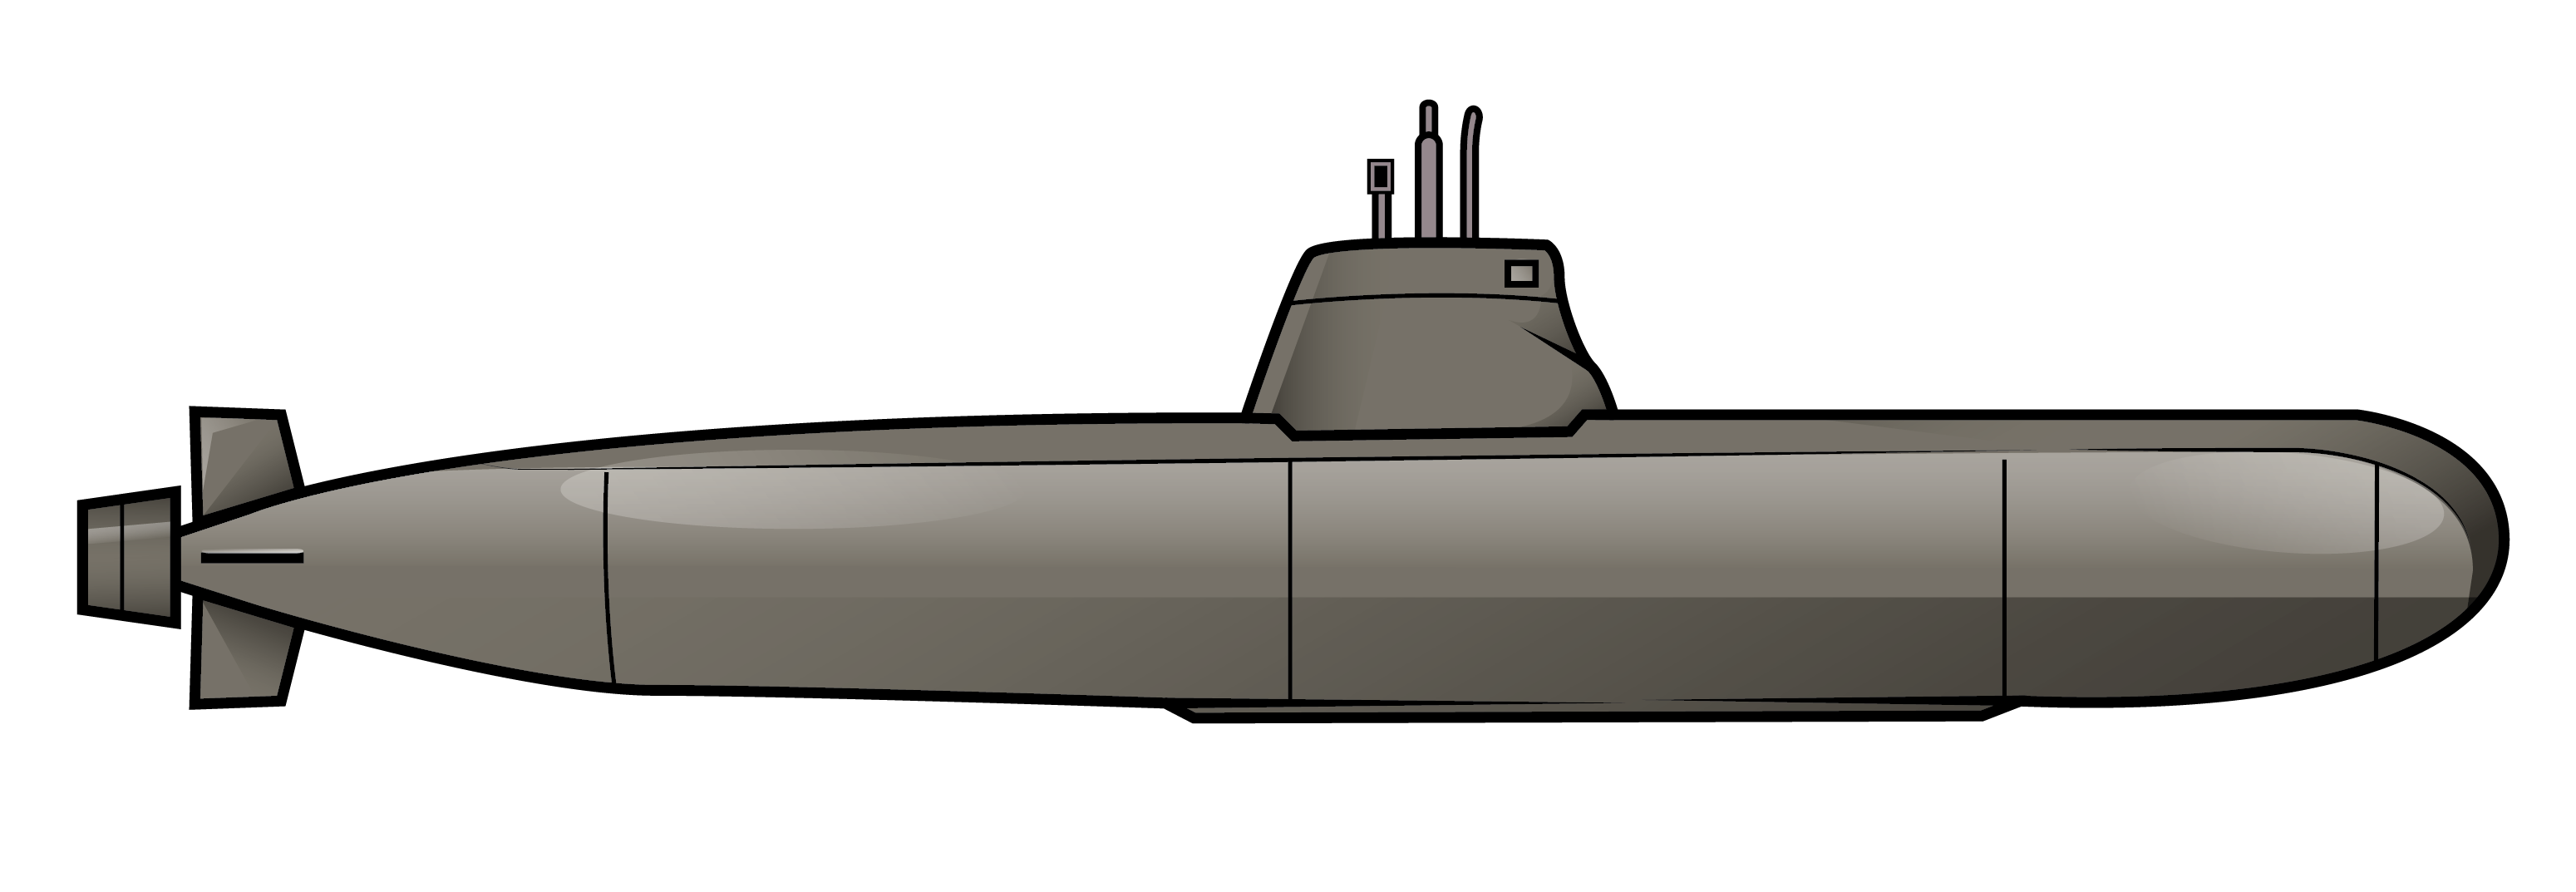 Submarine PNG HD File